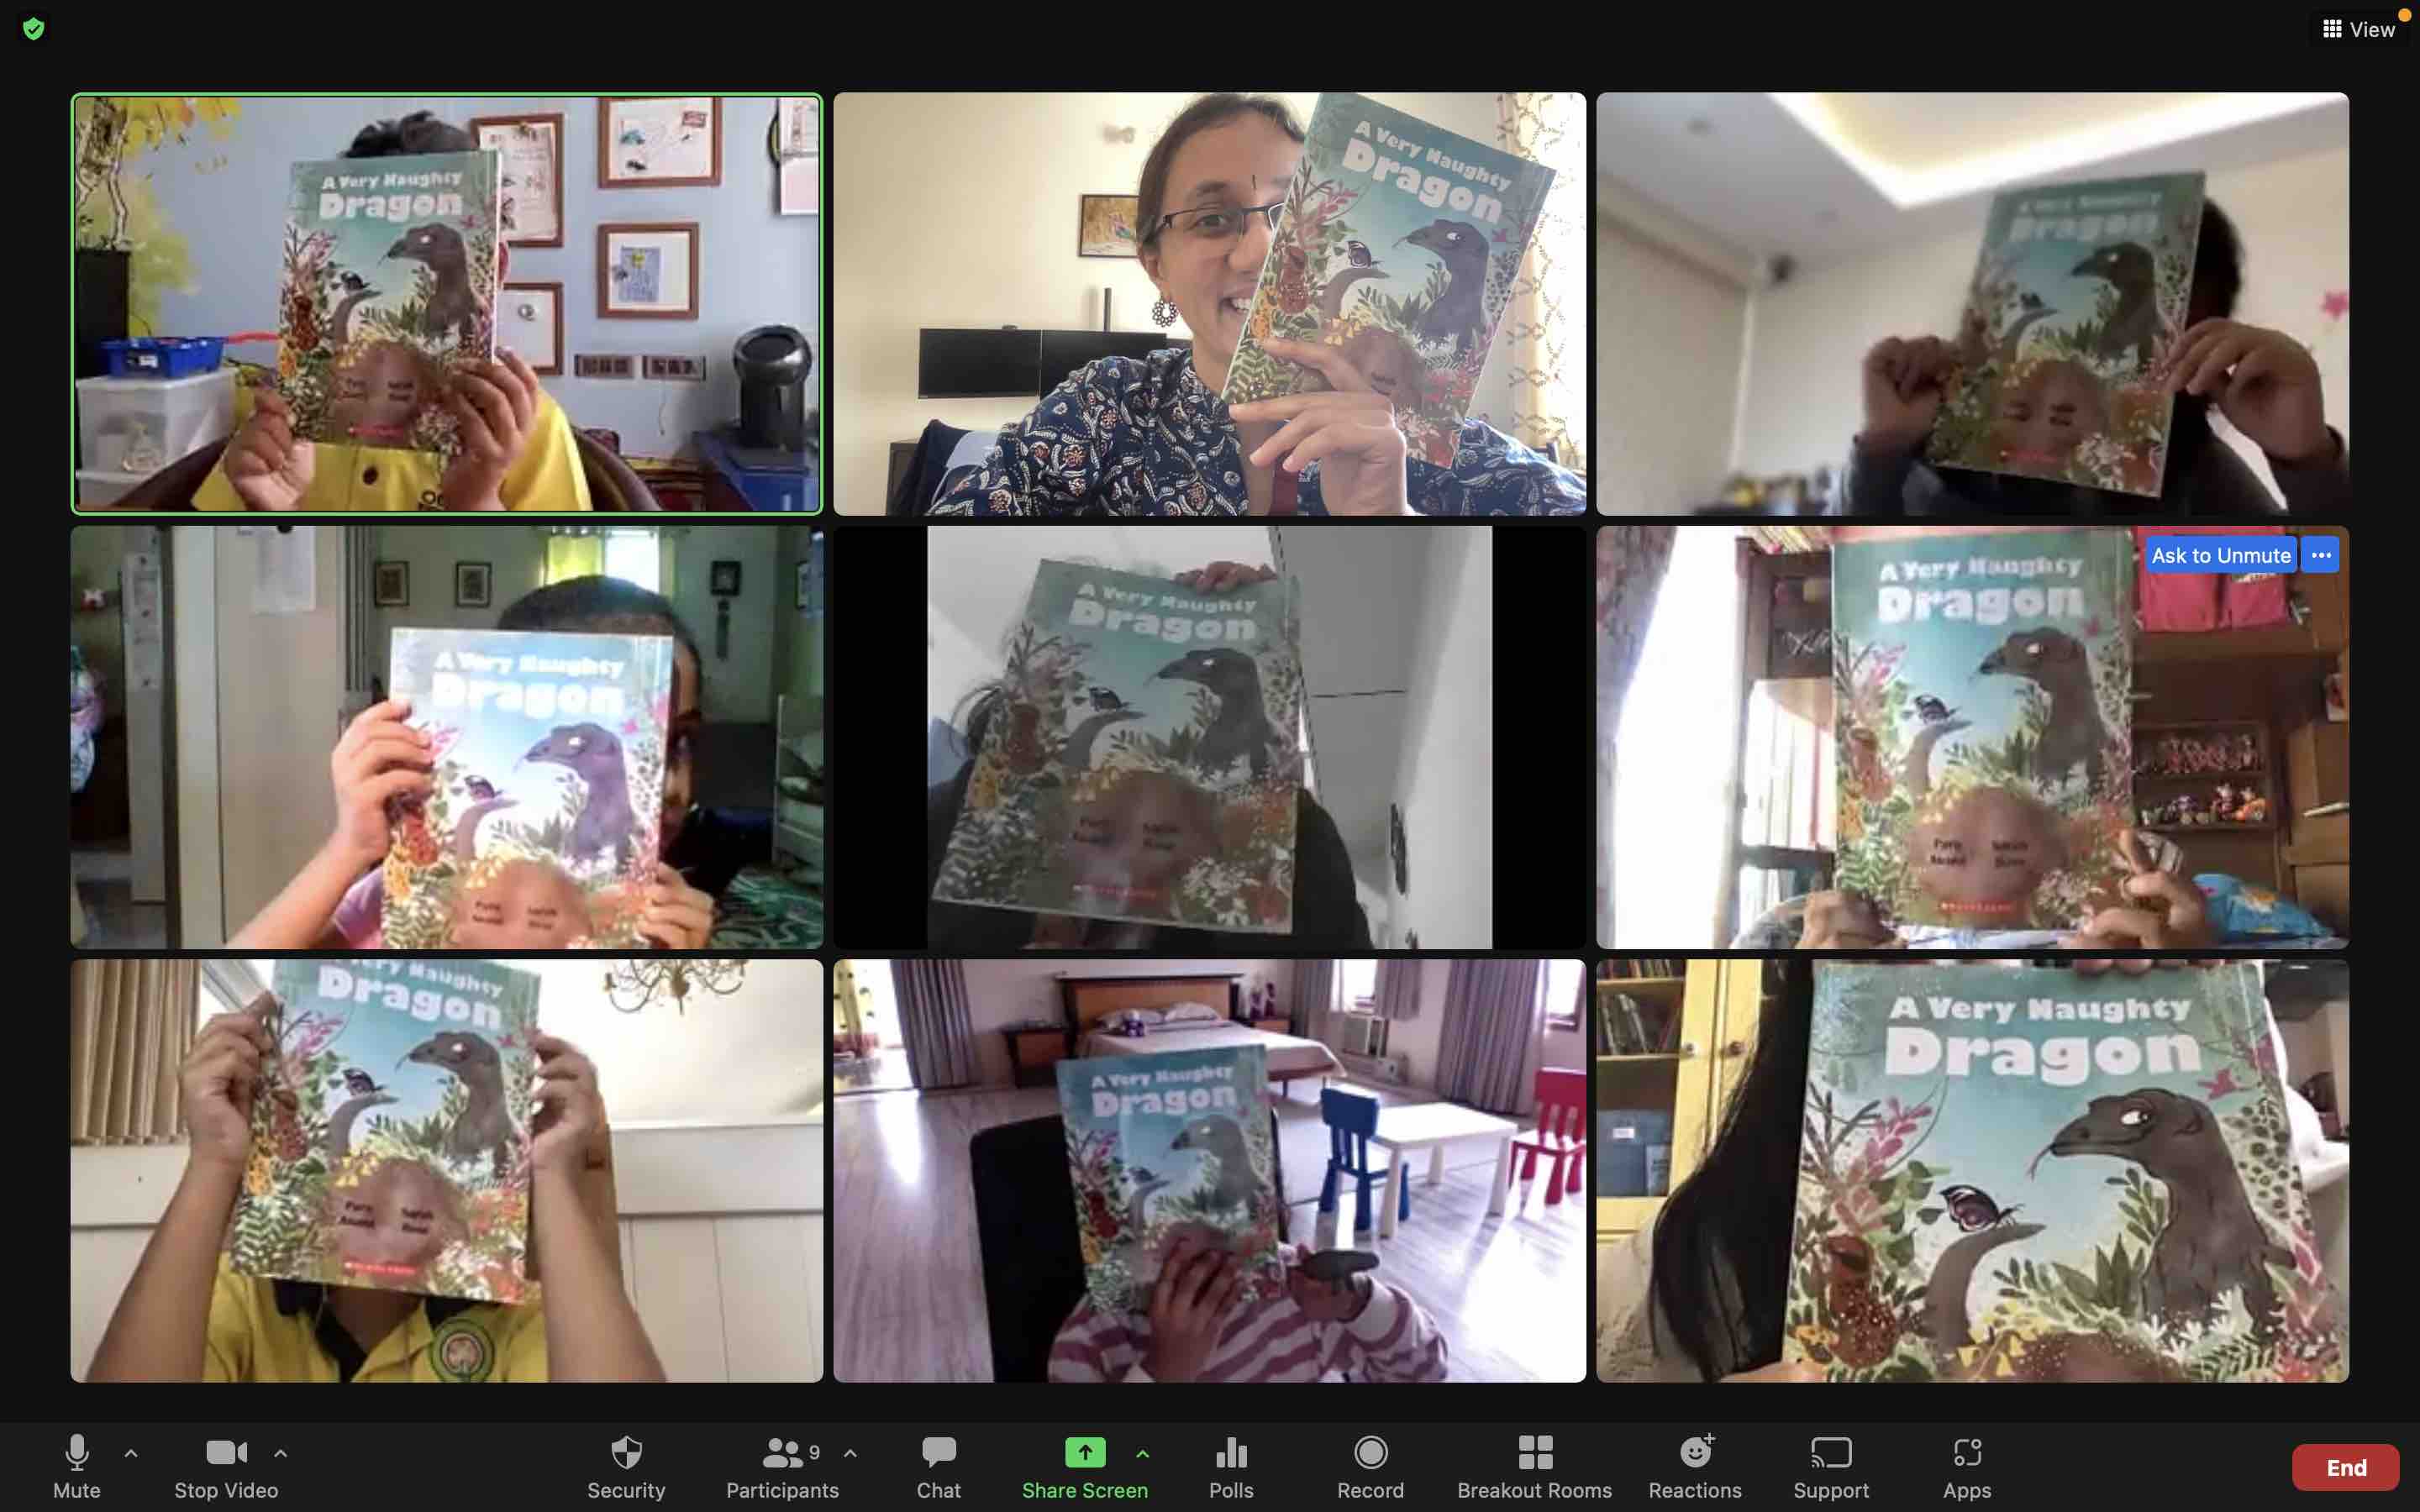 Screenshot of nine people holding up their copies of the book A Very Naughty Dragon, faces hidden.